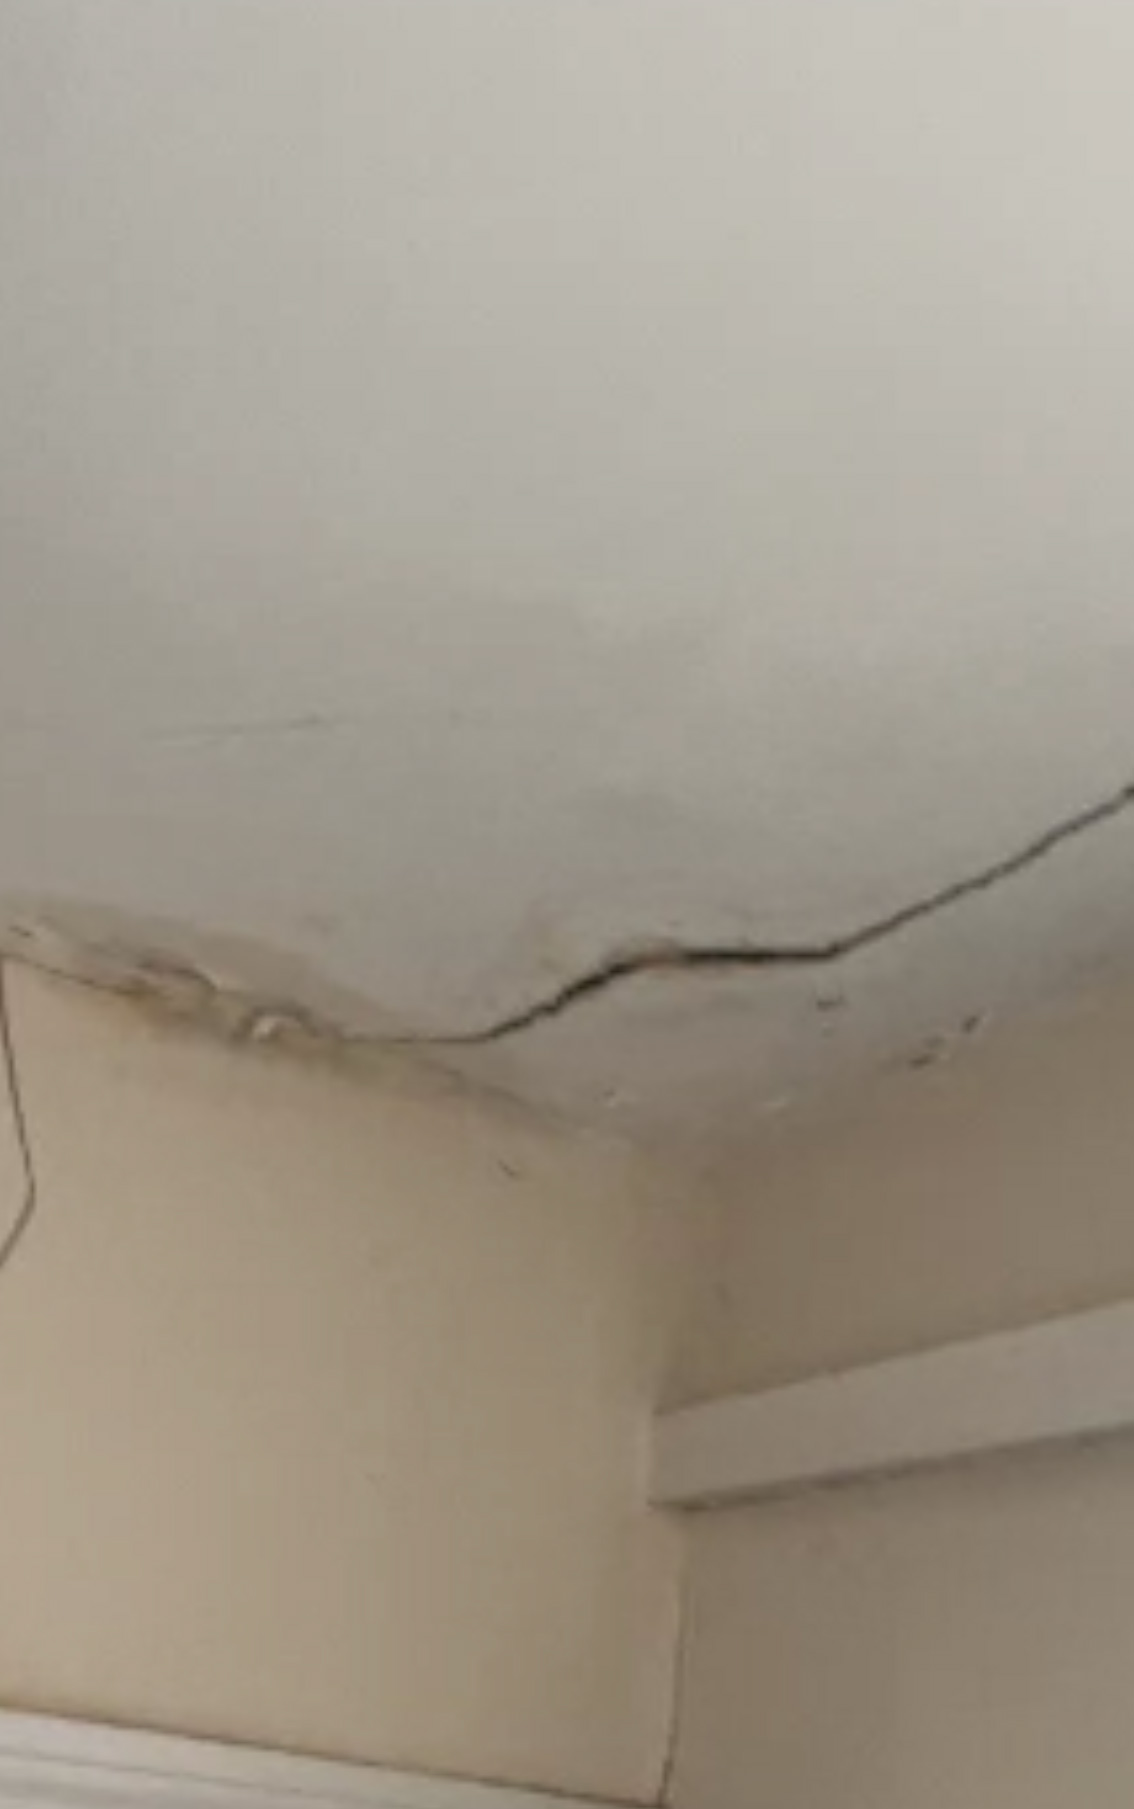 subsidence consultant video-call Lancaster 3